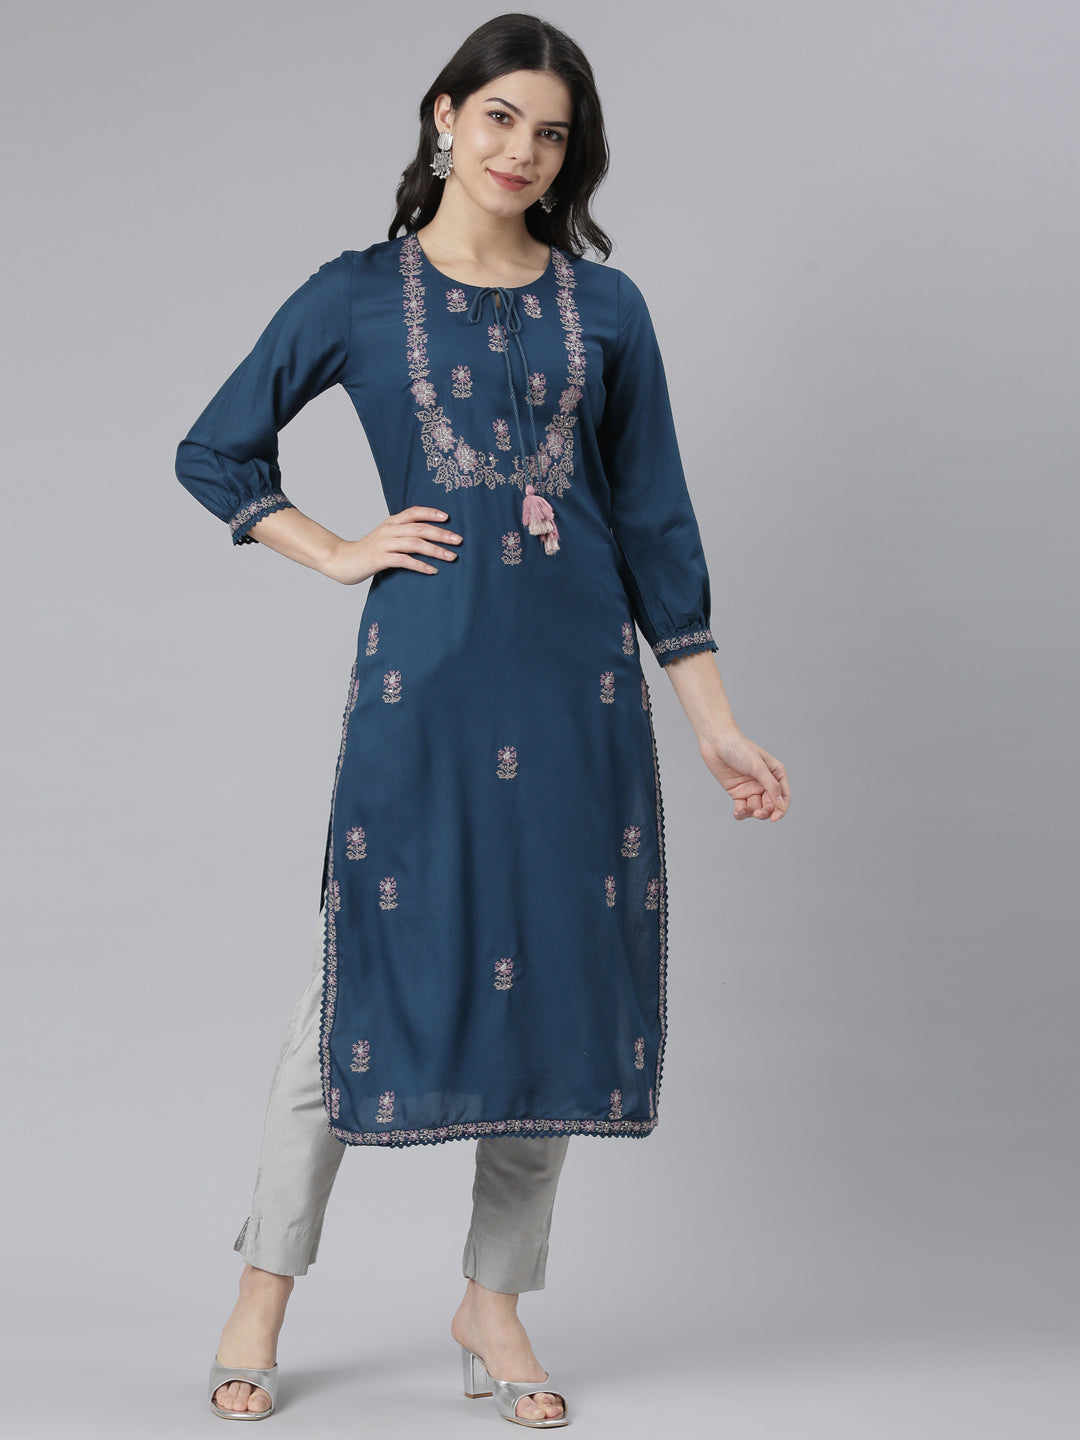 Neerus Grey Colored Cotton Fabric Tunic at Rs 1490/piece | Cotton Tunics in  Hyderabad | ID: 15789360388